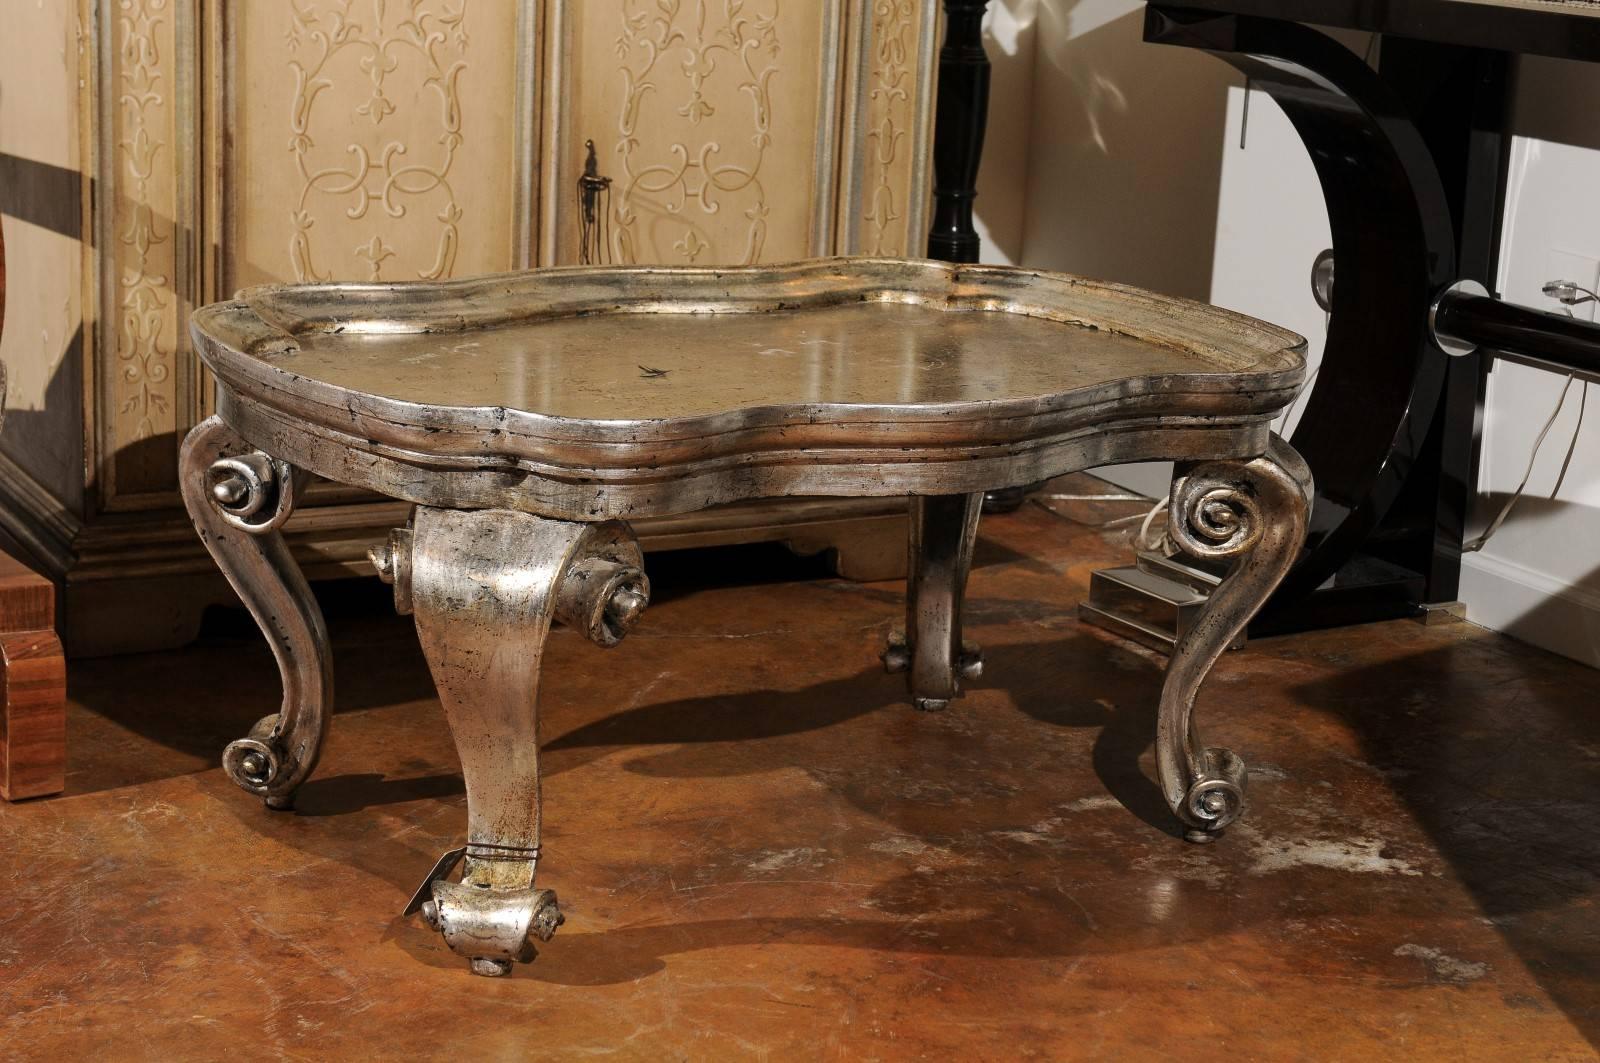 An Italian Rococo style silver leaf painted coffee table with tray top from the mid 20th century. This Italian coffee table features a serpentine shaped tray top raised on four exquisitely carved s-scroll legs. The volute motif, particularly praised